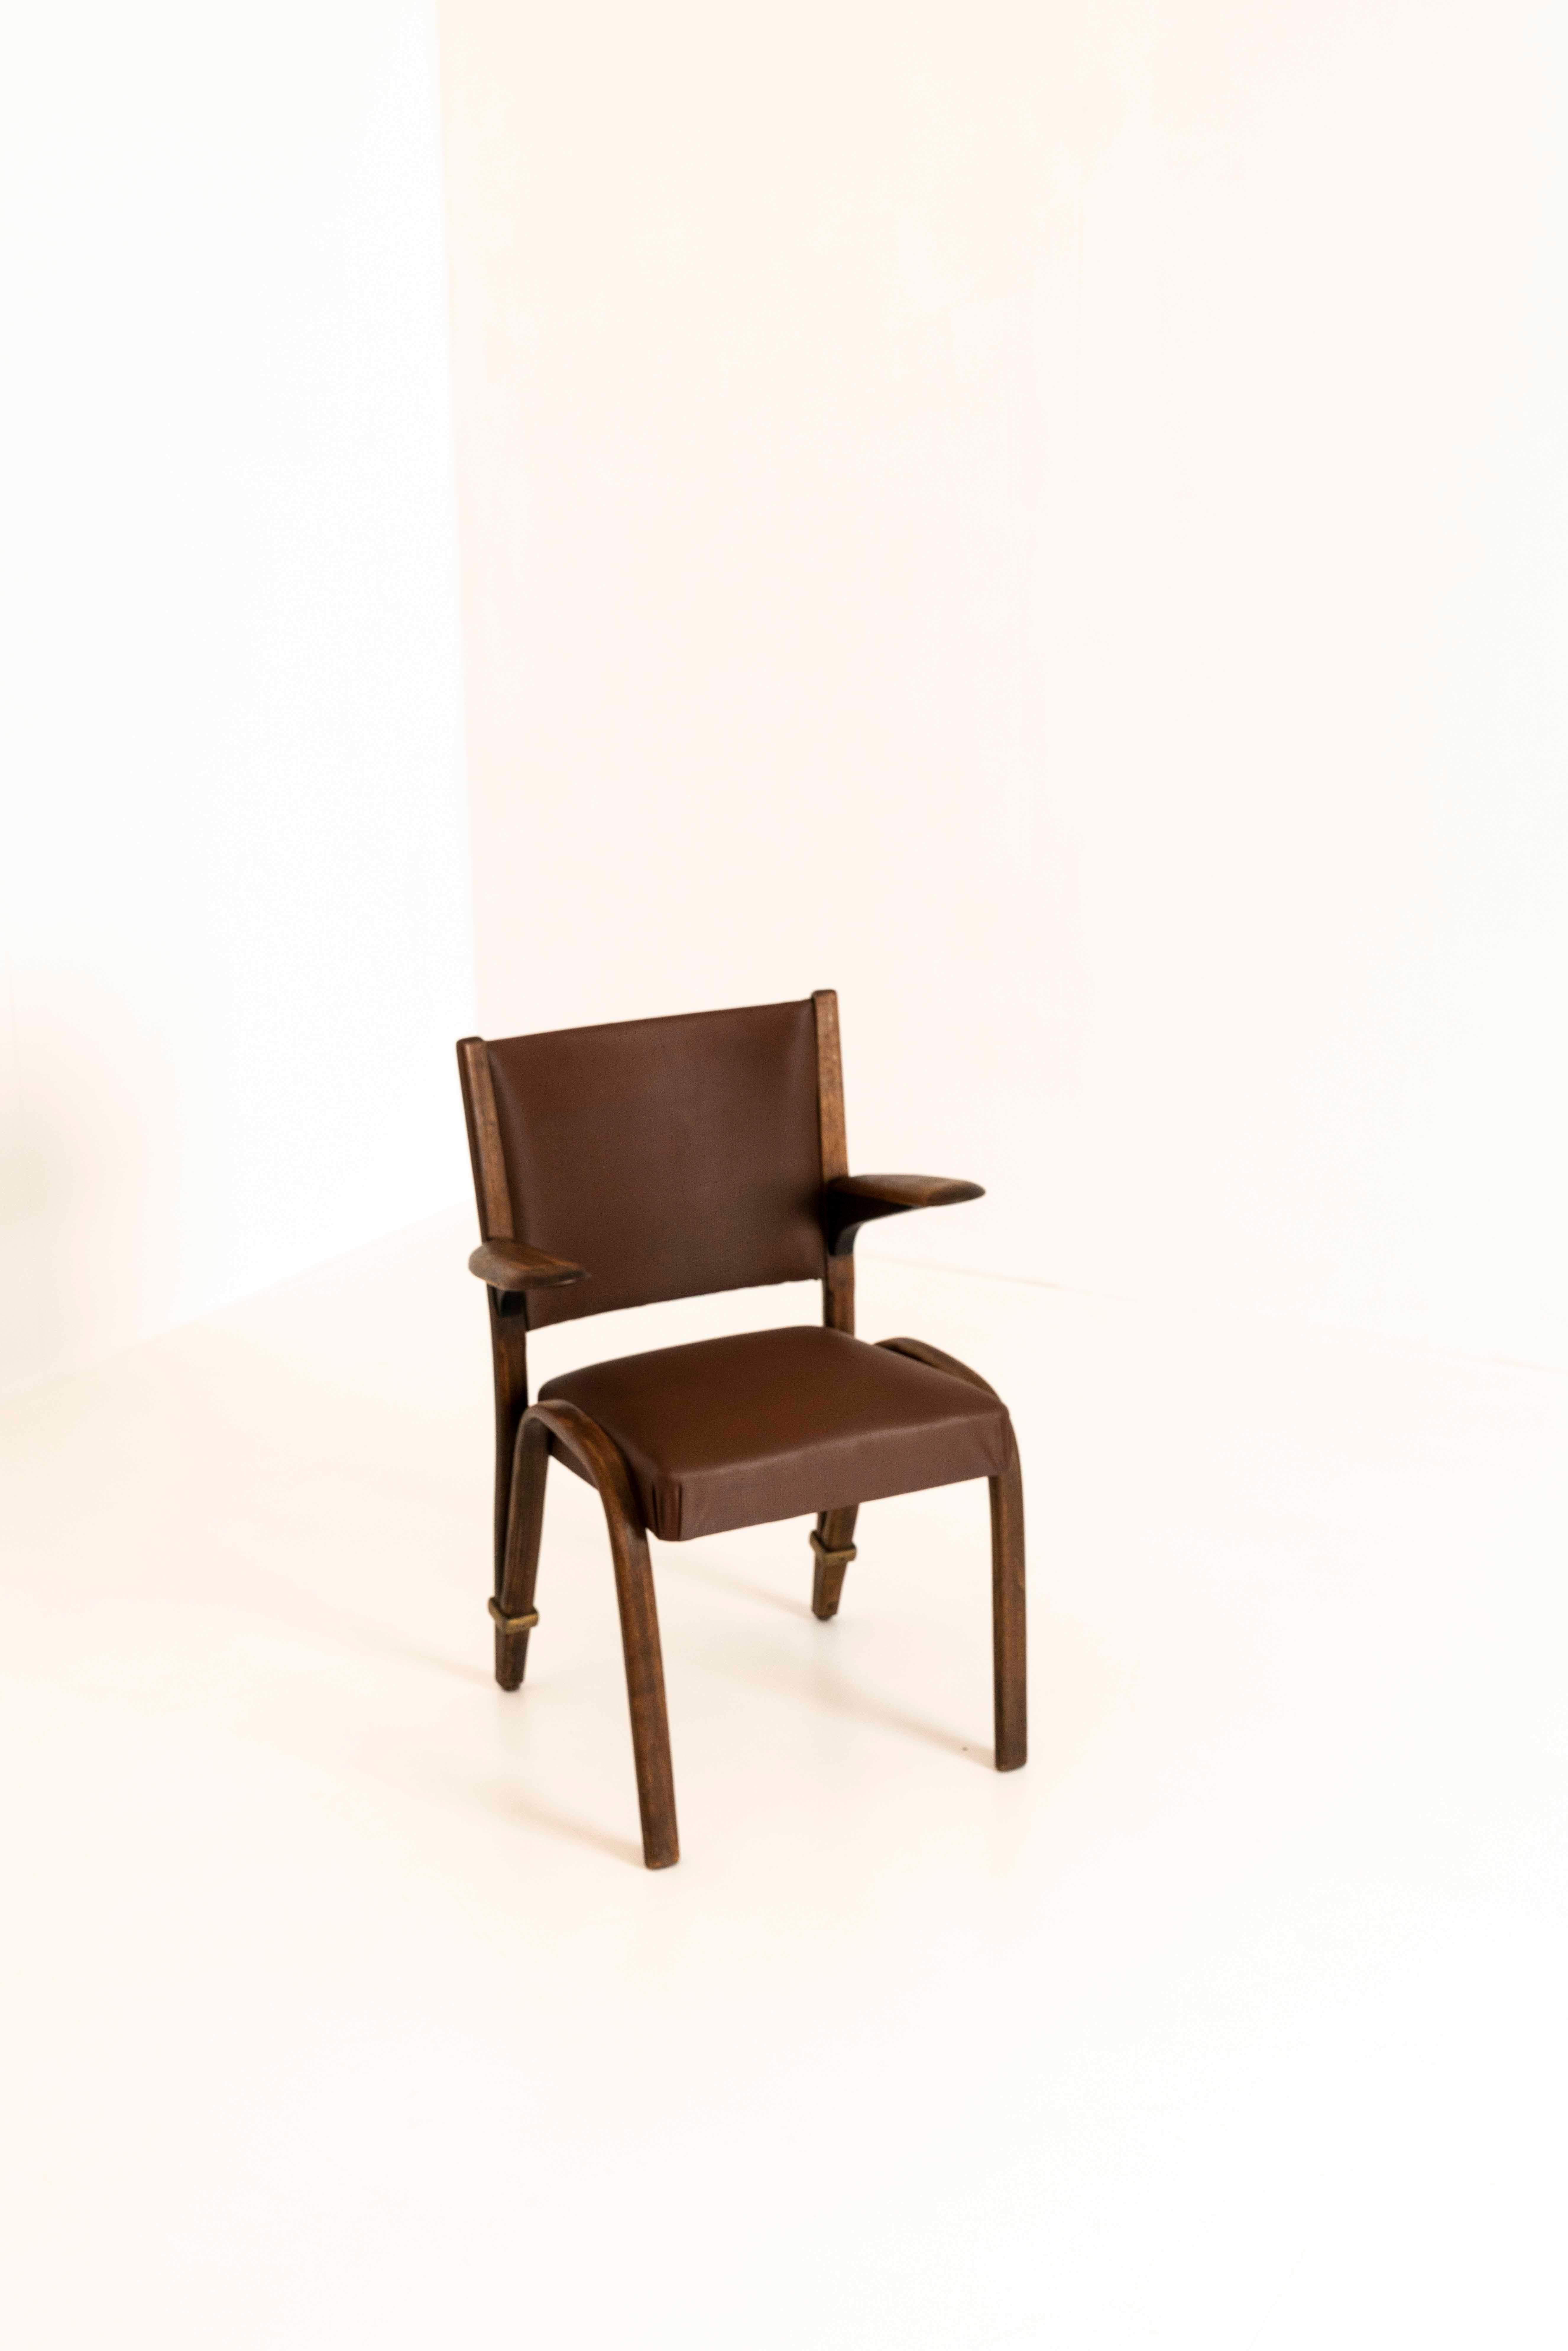 Set of two vintage French chairs by Hugues Steiner from the 1960s. These 'spring back' chairs have a very exceptional design that is recognizable for Hugues Steiner. They have a dark brown 'skai-like' cover and a dark-brown wooden base. They are in